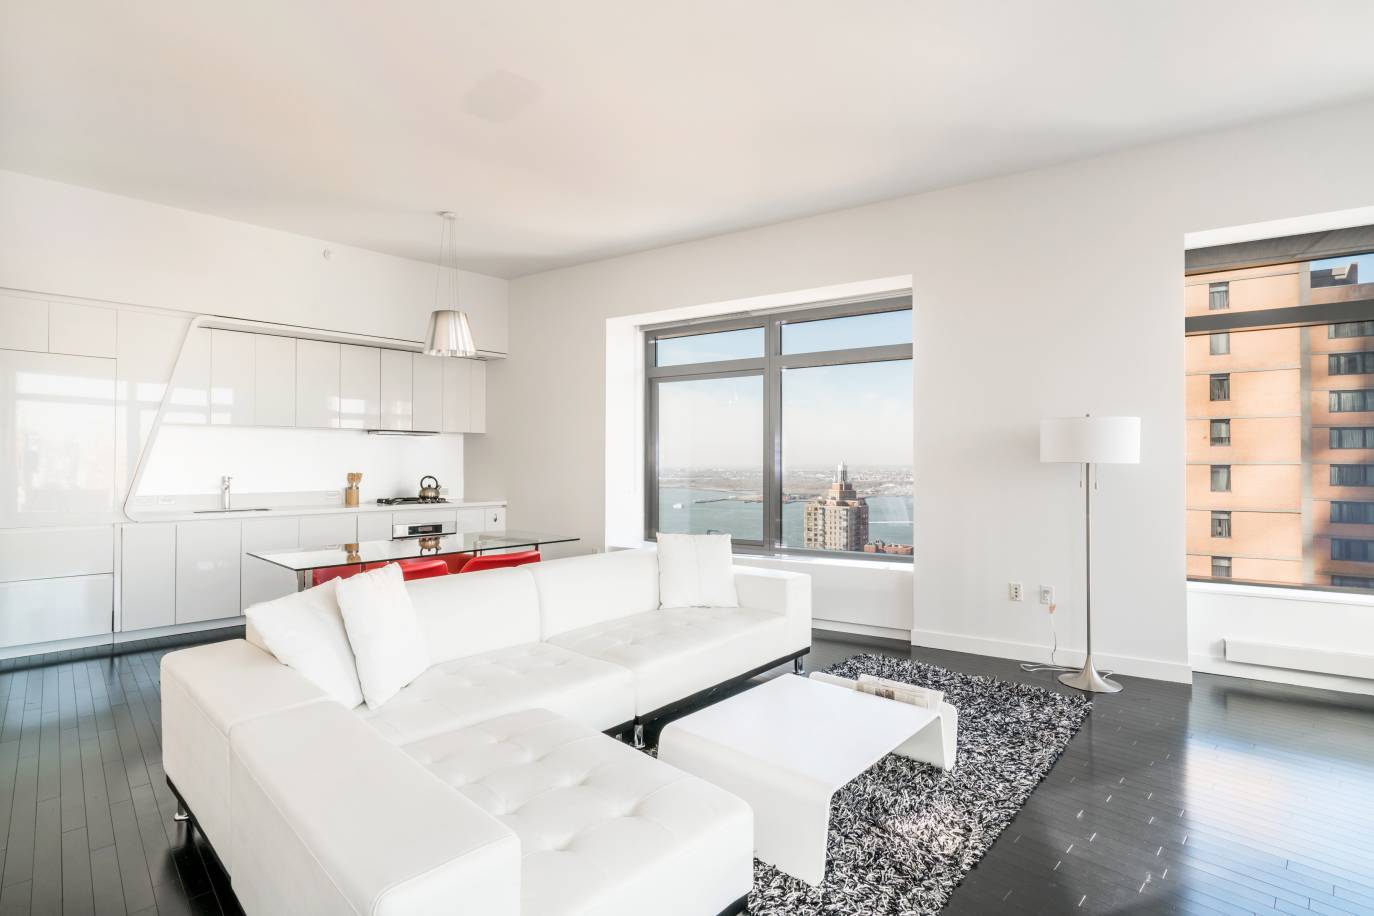 Priced considerably below the comparable apartments in the building, the thirtieth floor portfolio is a perfect opportunity for investors looking for a collection of income generating units.